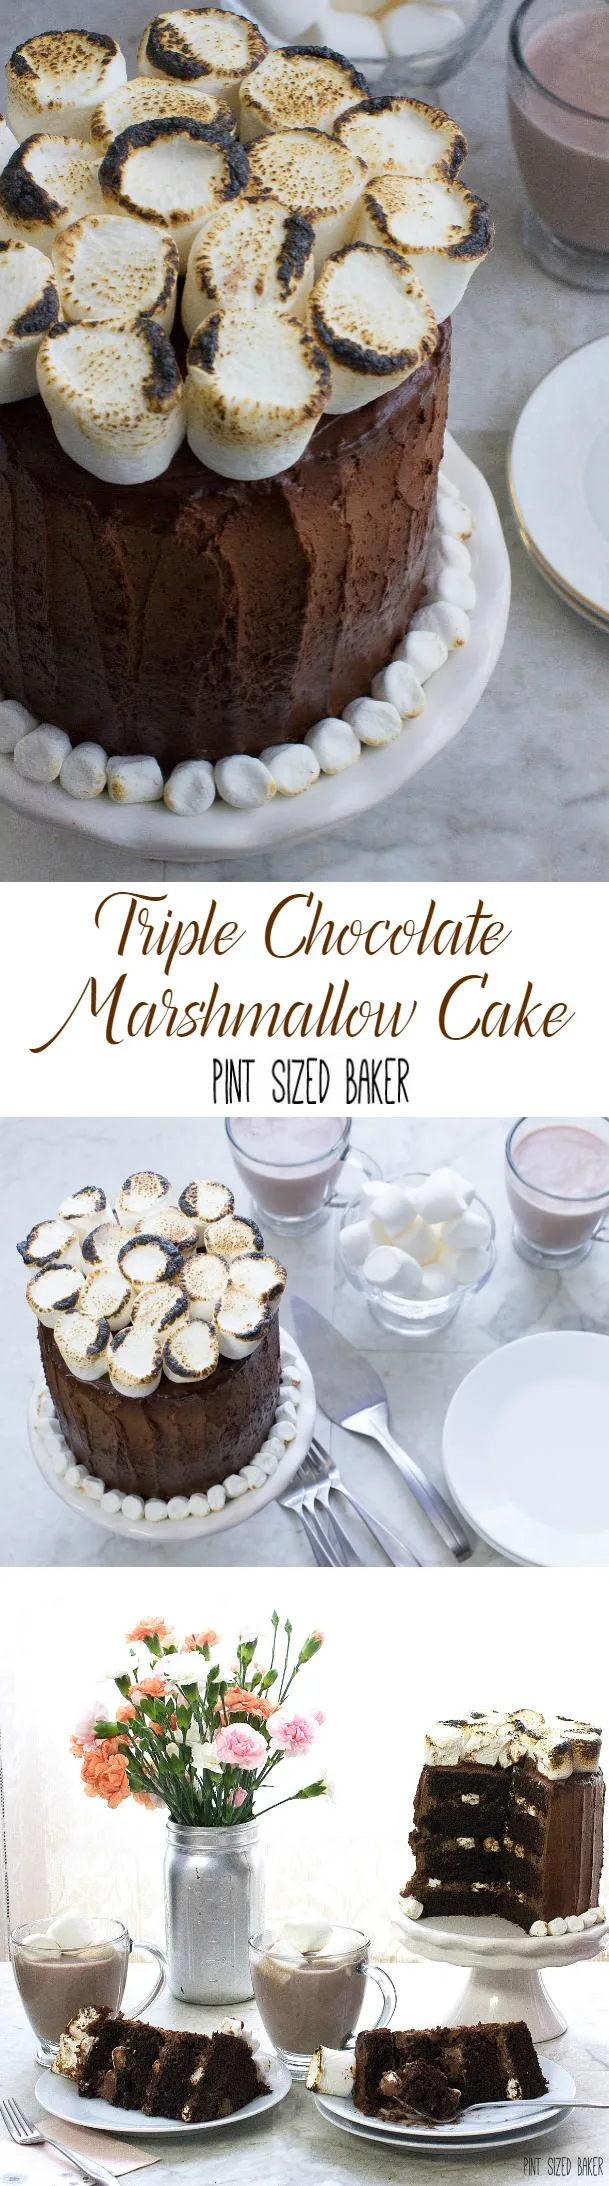 This Triple Chocolate Marshmallow Cake is calling my name!! Chocolate Cake, and fudgy frosting with toasted marshmallows is a really delicious dessert!